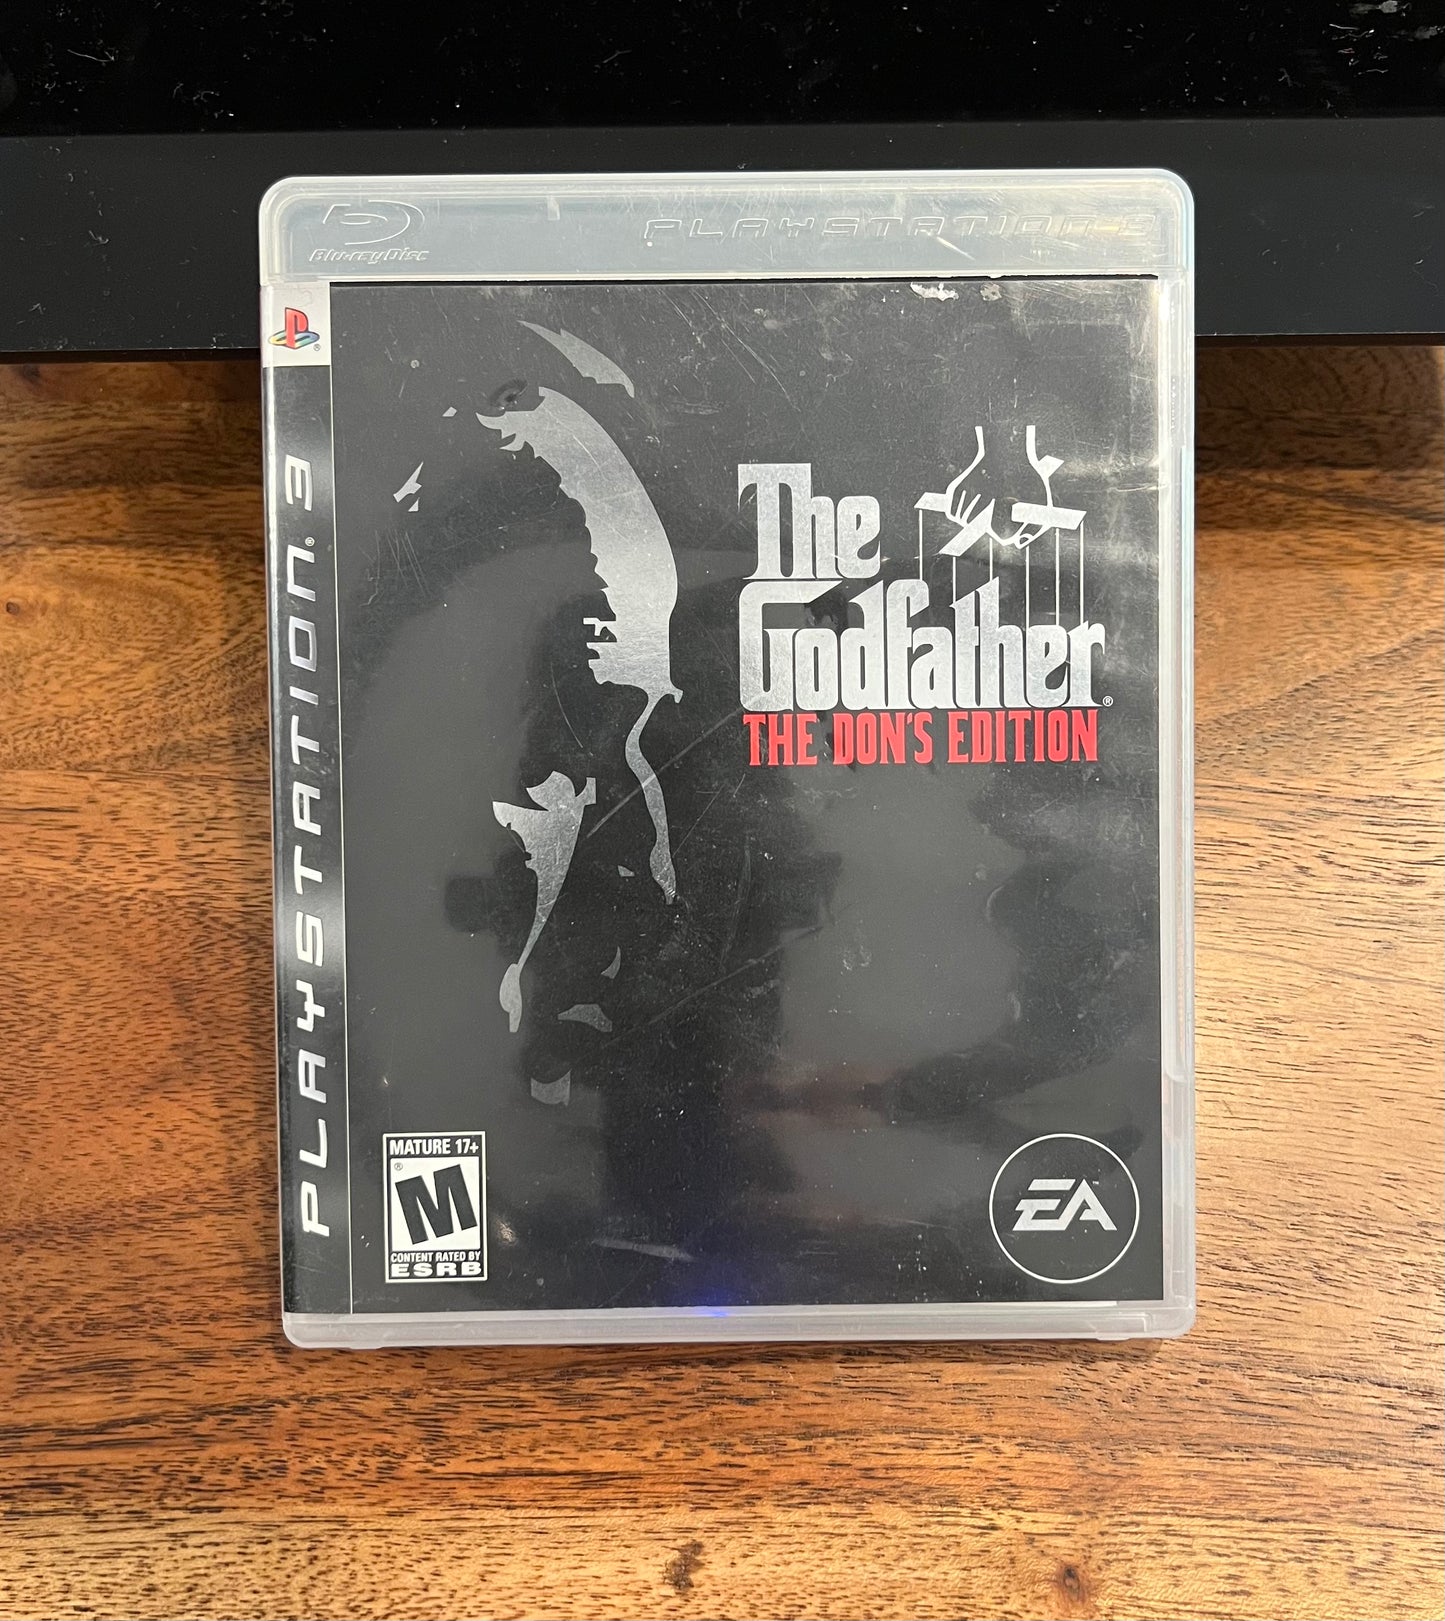 The Godfather Don's Edition - Playstation 3